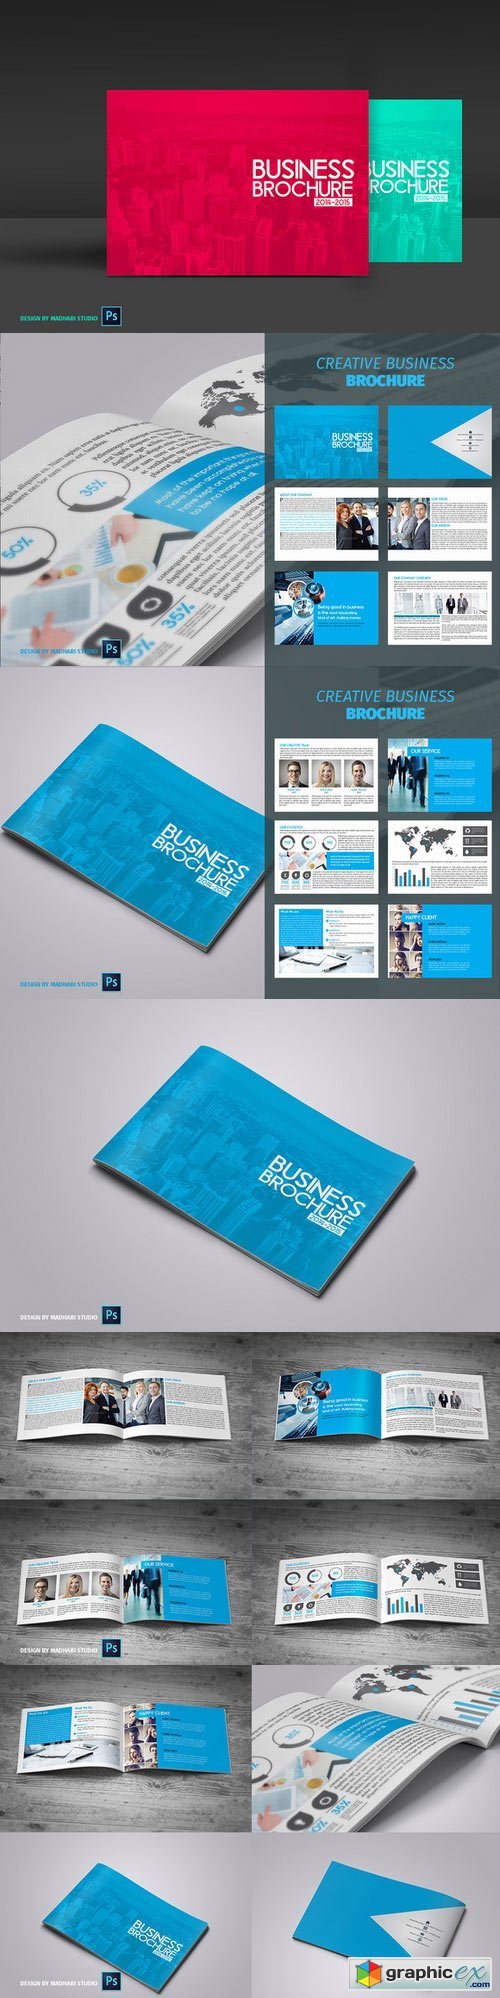 12 Pages Business Brochure